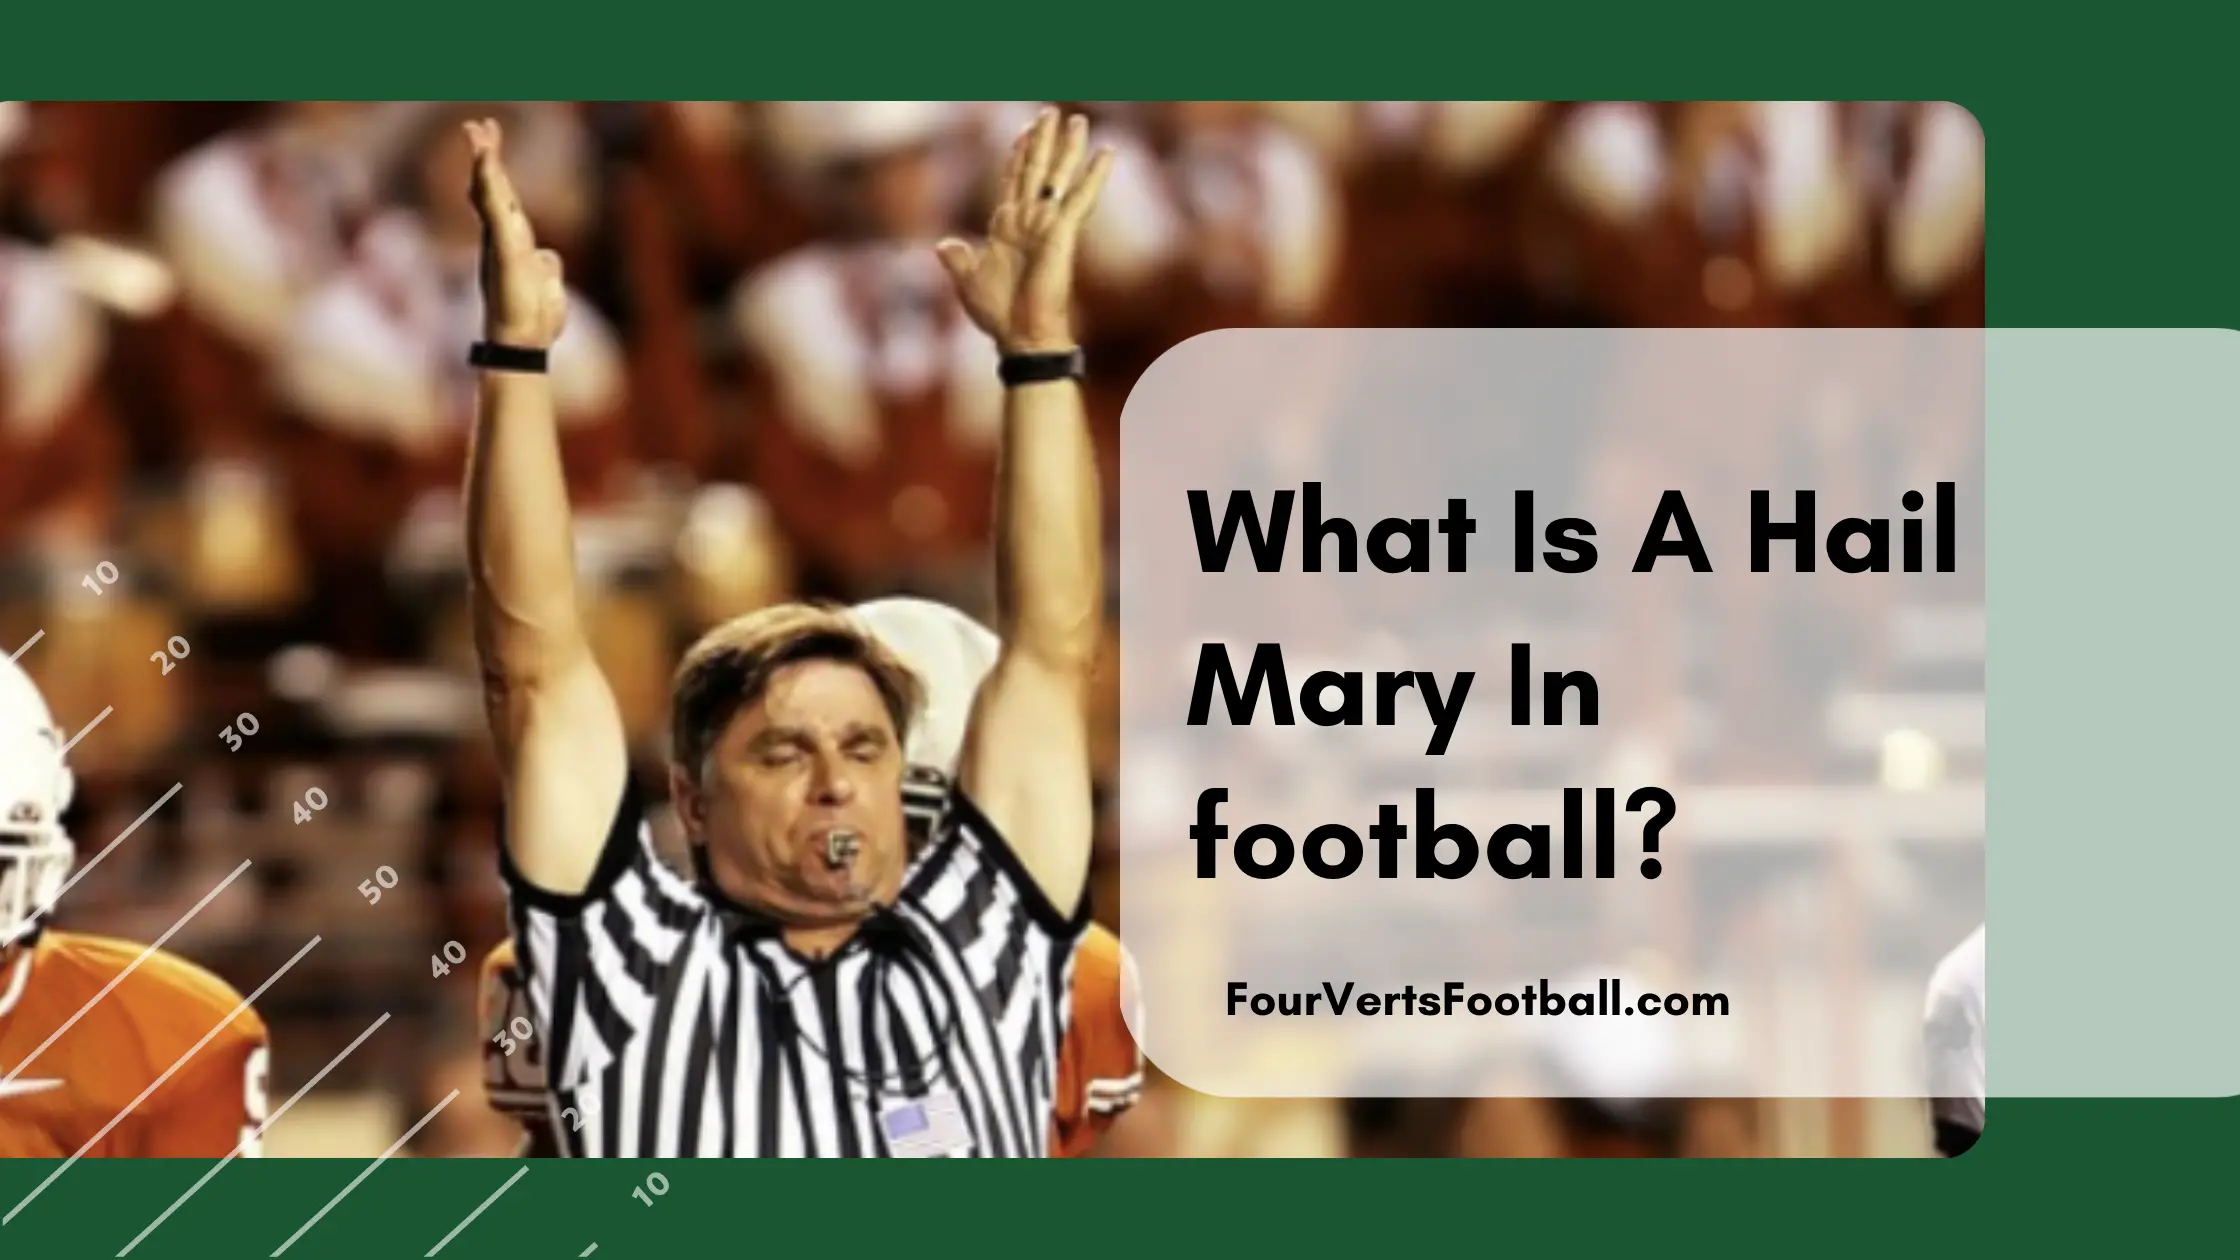 What Is A Hail Mary In Football